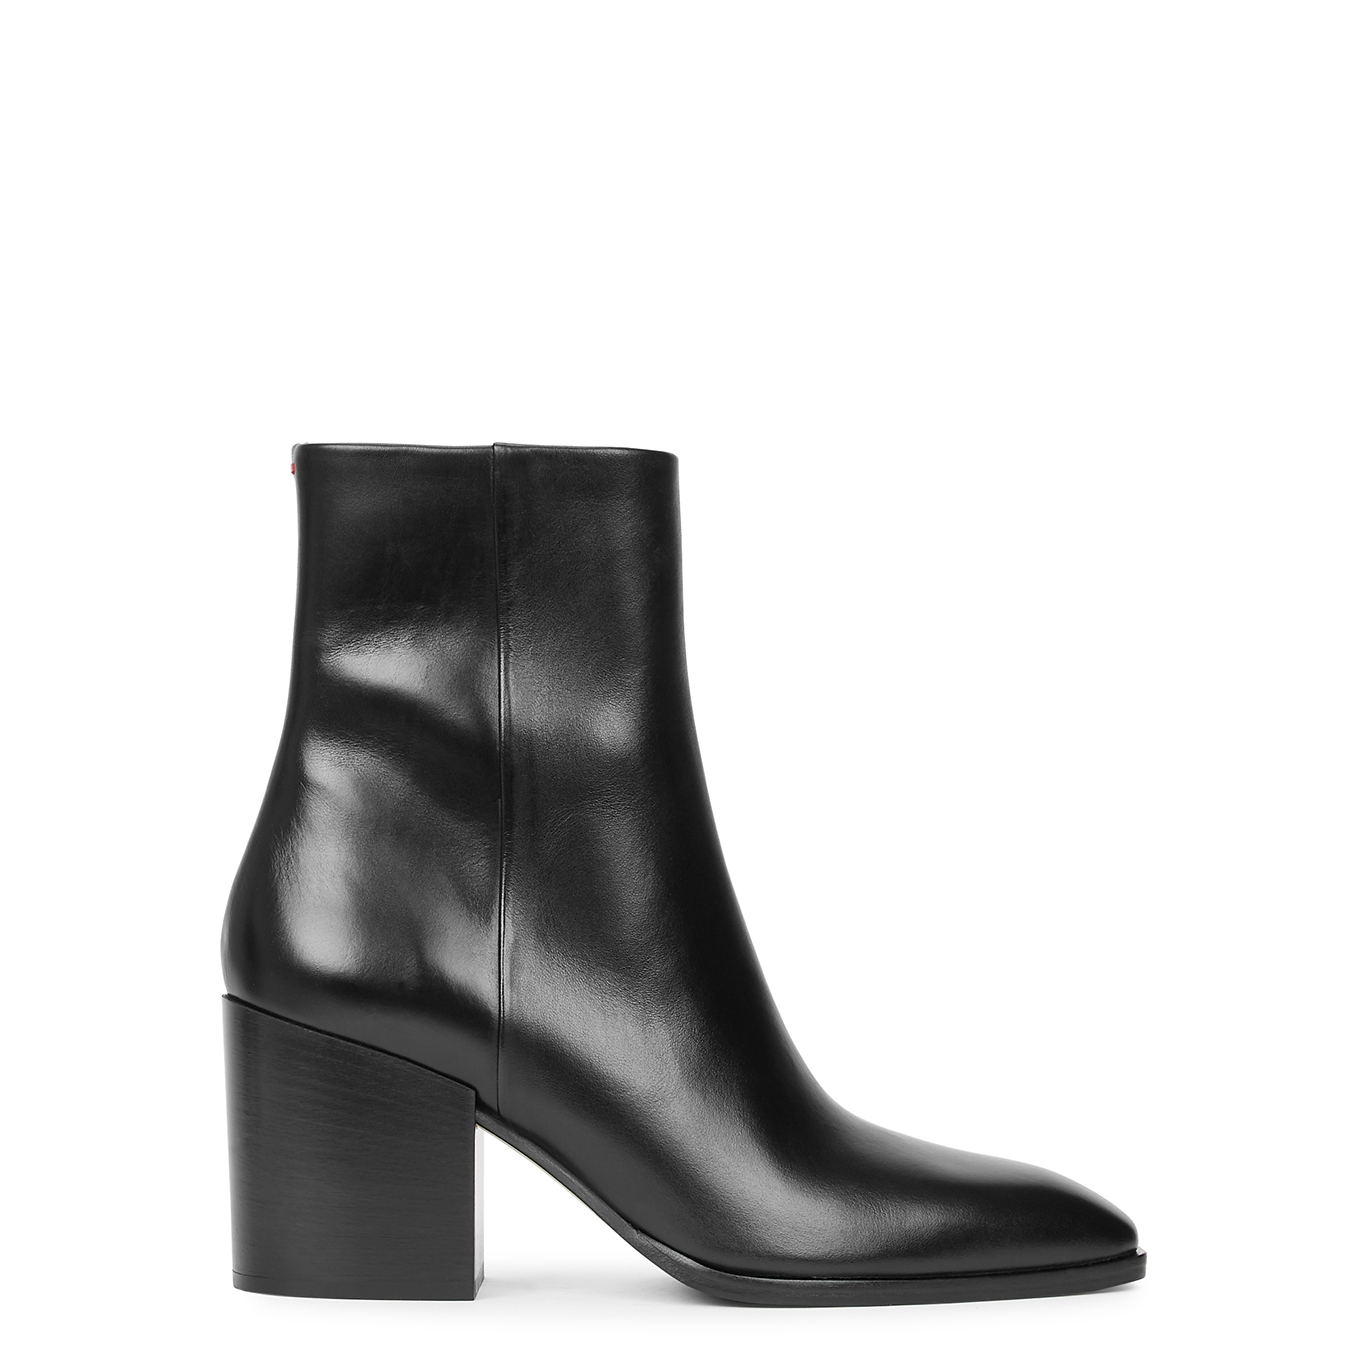 Aeyde Leandra 80 Black Leather Ankle Boots - 3